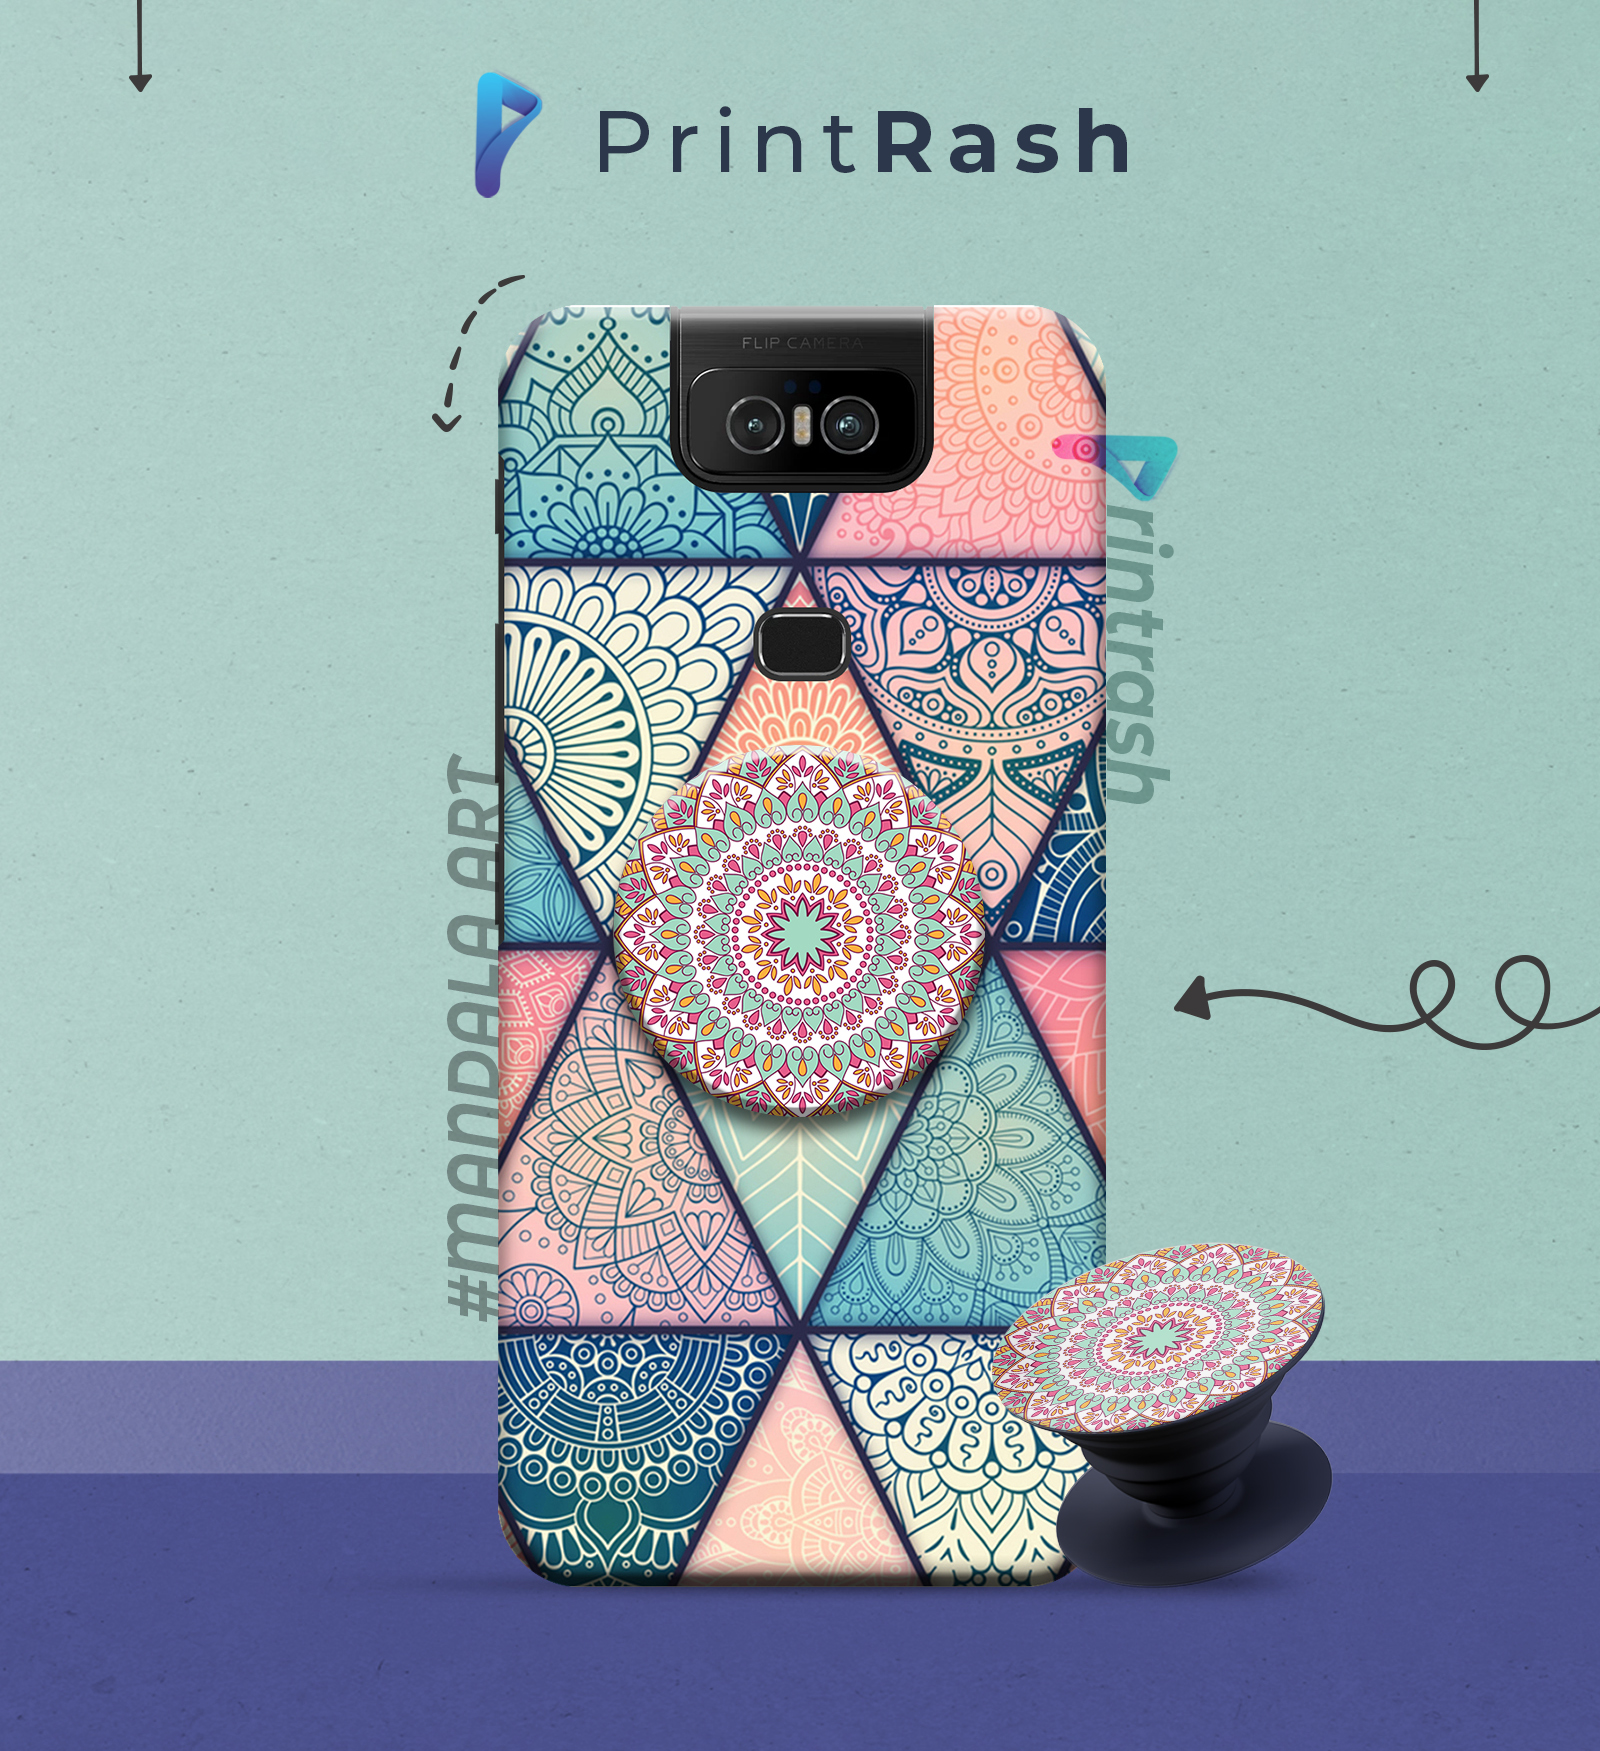 Printrash: All Printing Solution in Your Pocket